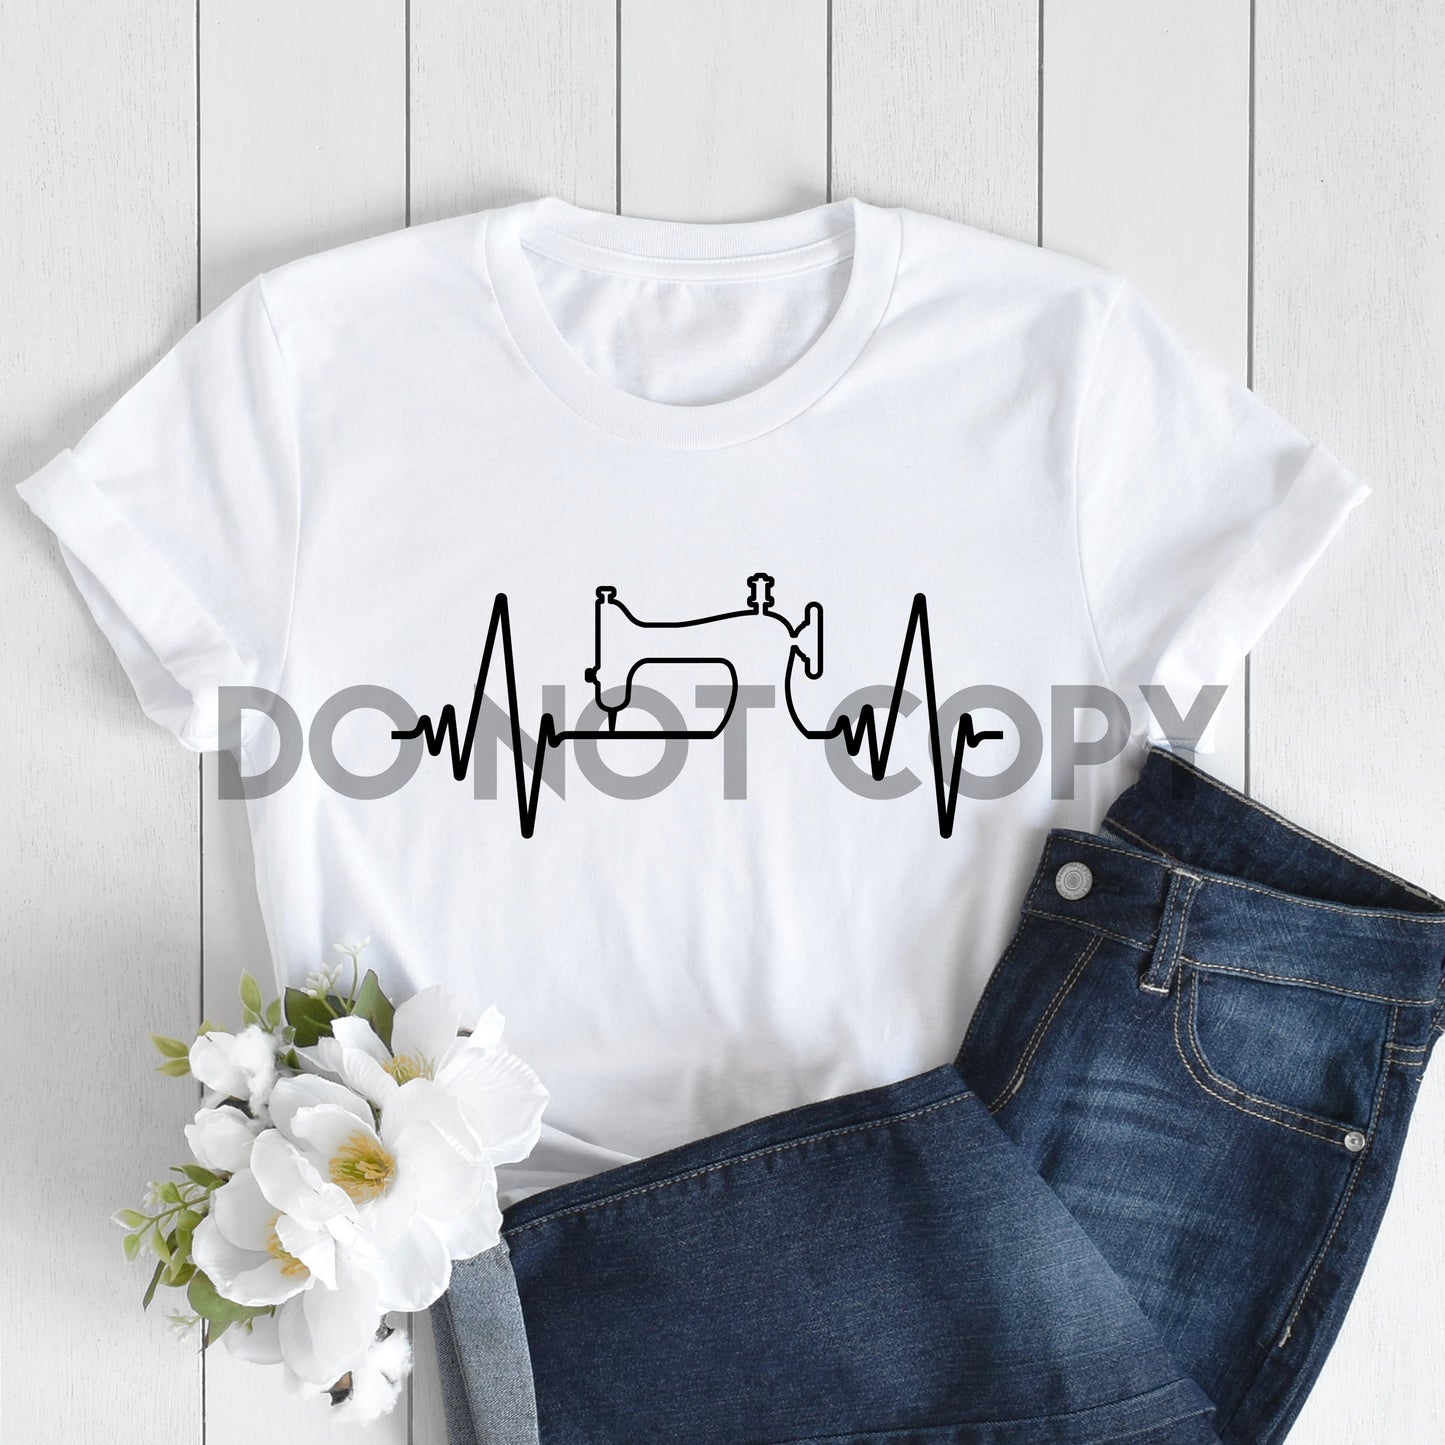 Sewing Machine Heartbeat Sublimation print